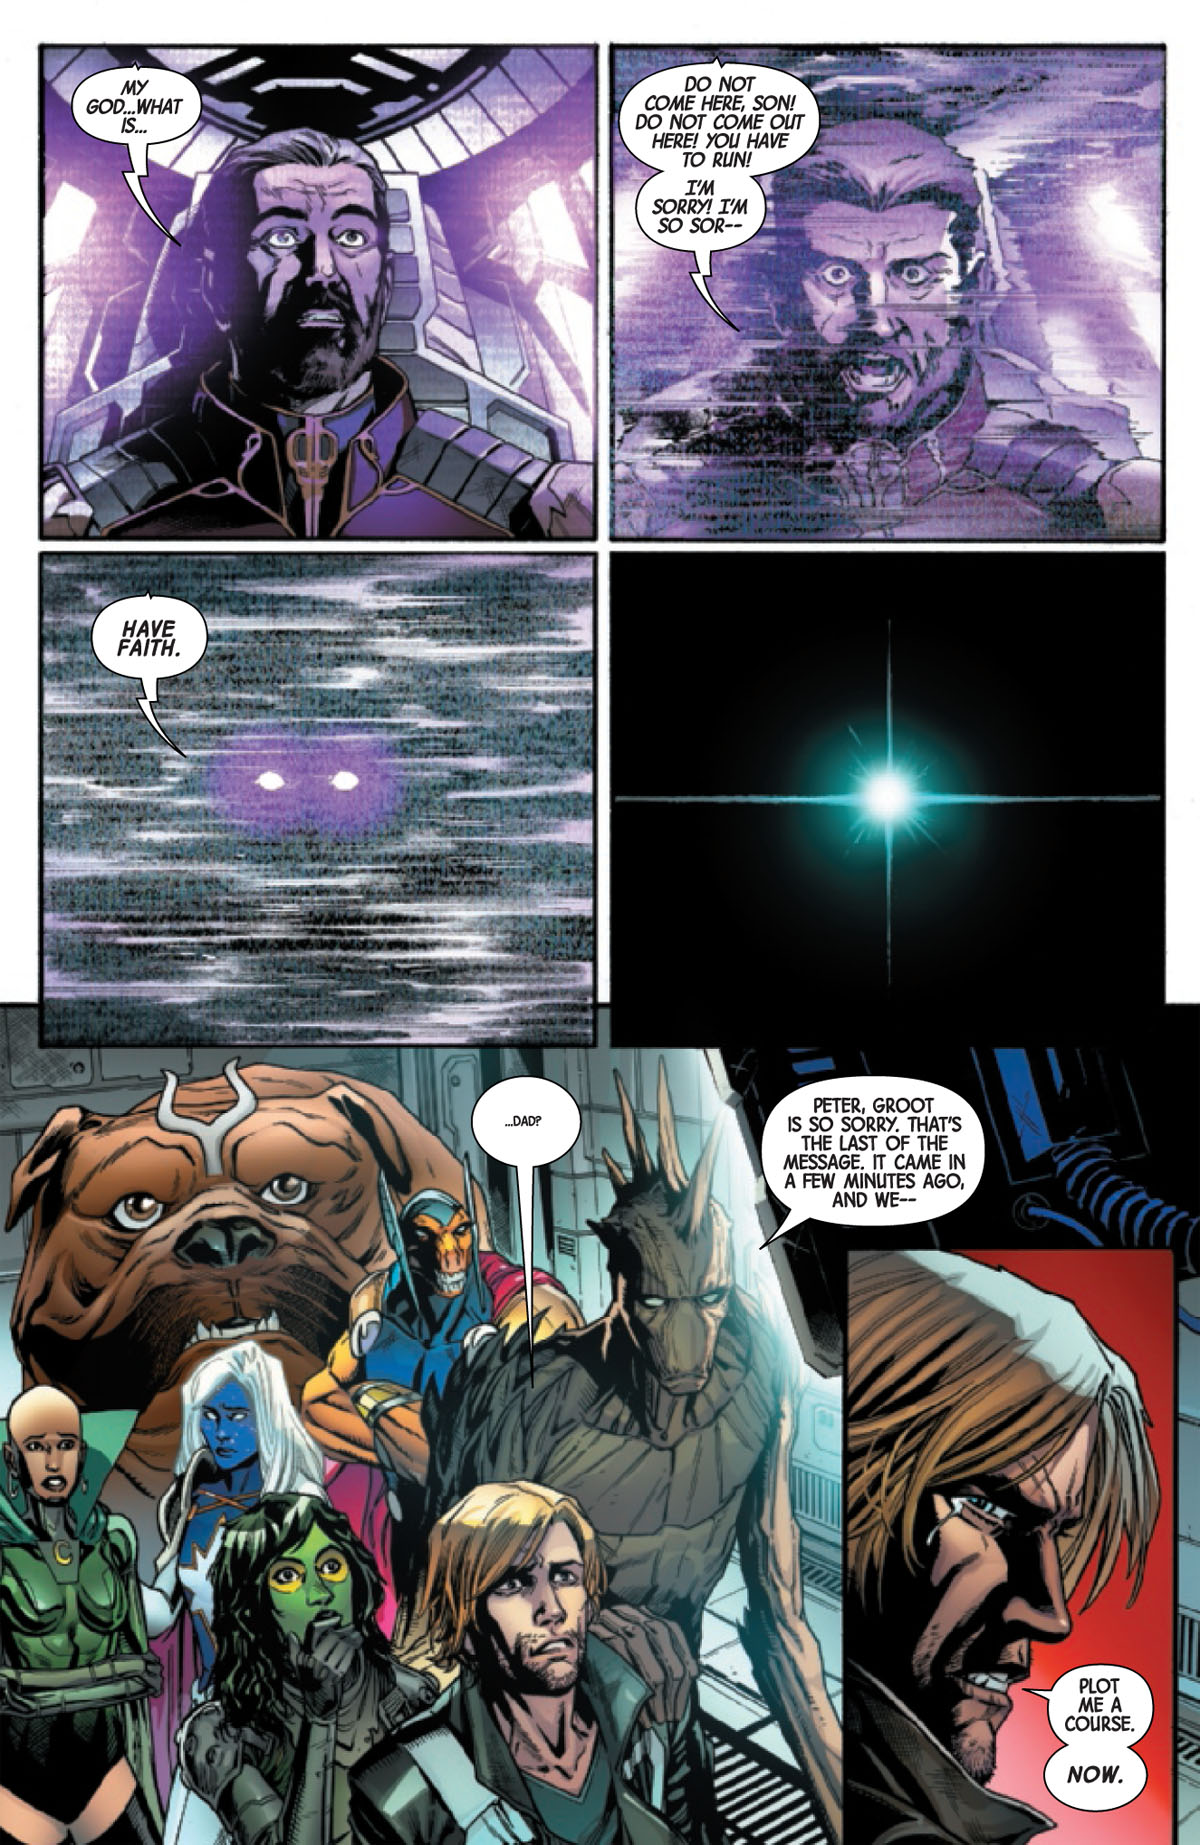 Guardians of the Galaxy #7 page 4